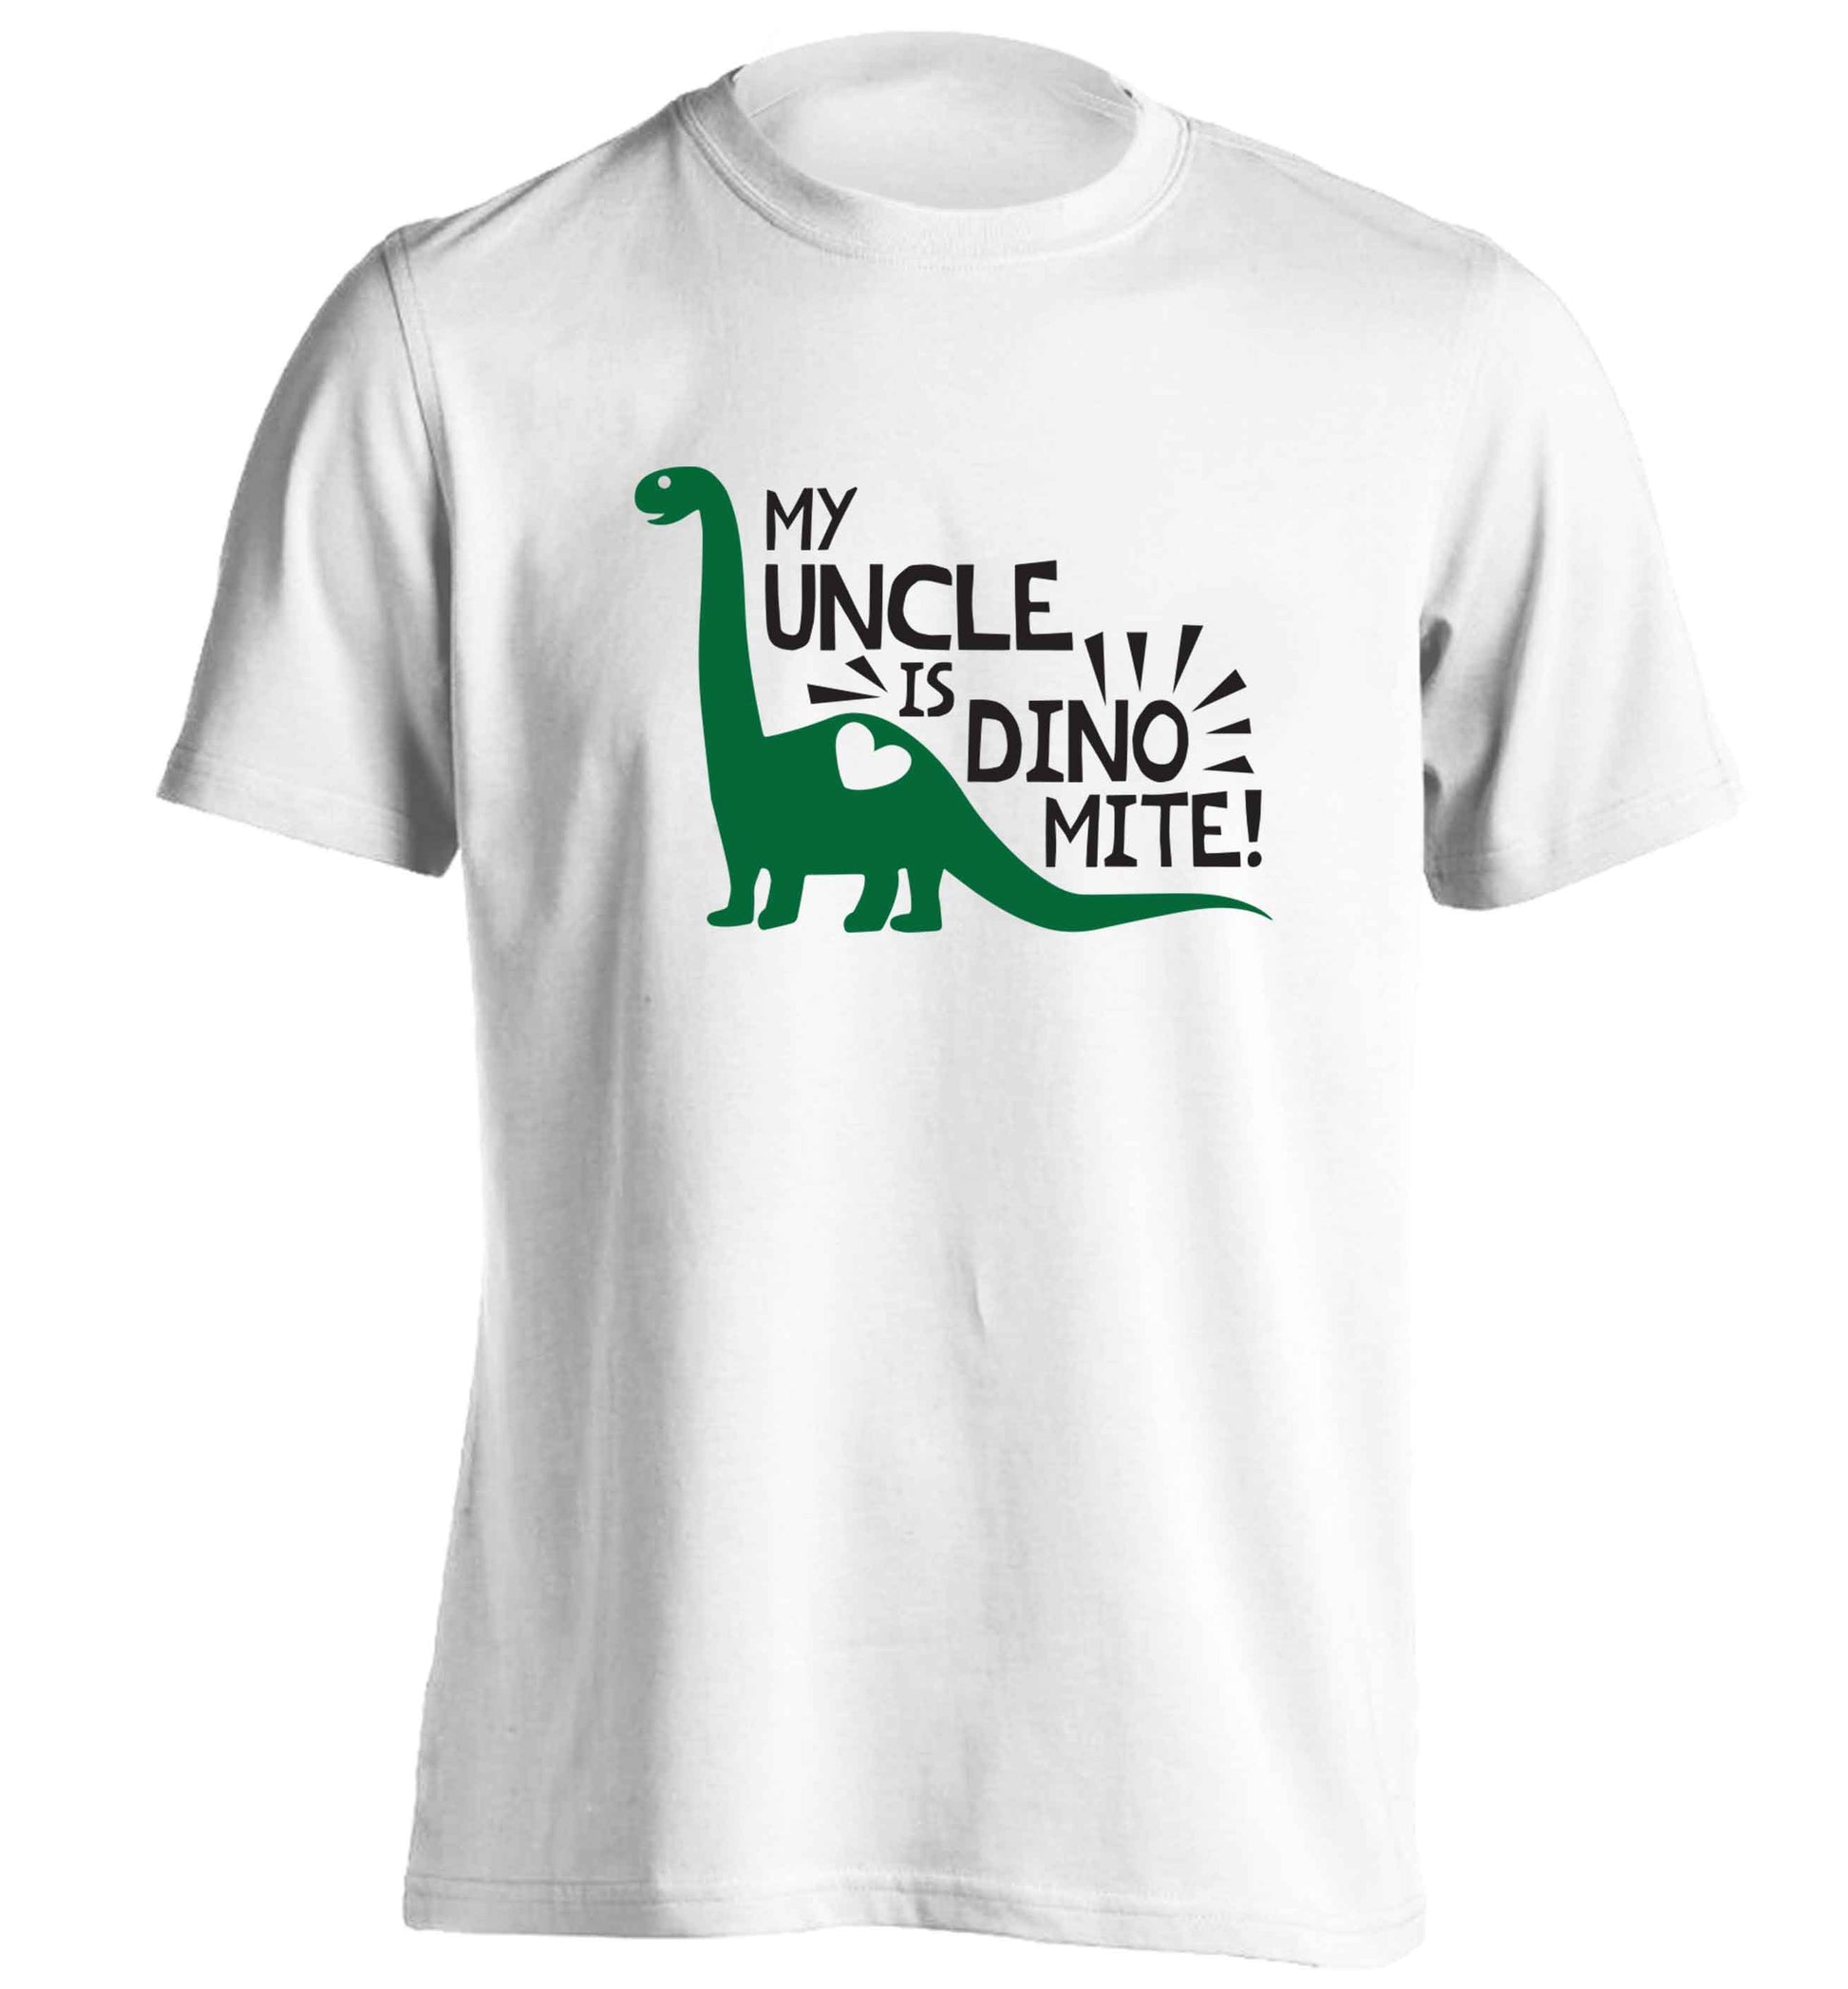 My uncle is dinomite! adults unisex white Tshirt 2XL